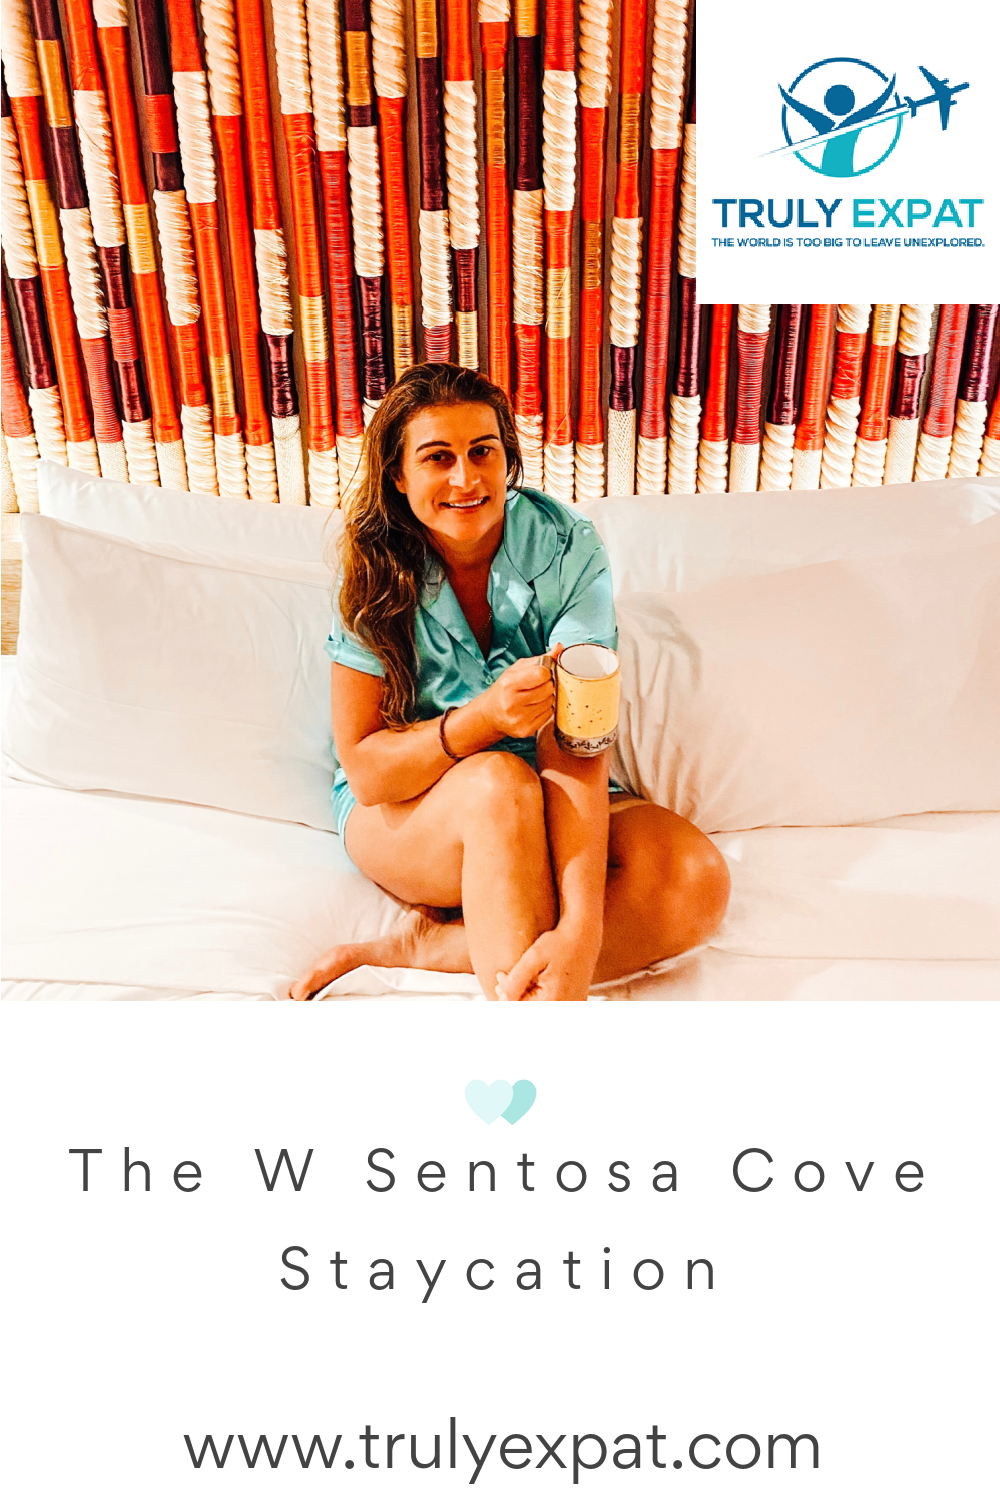 The W Sentosa Cove Staycation